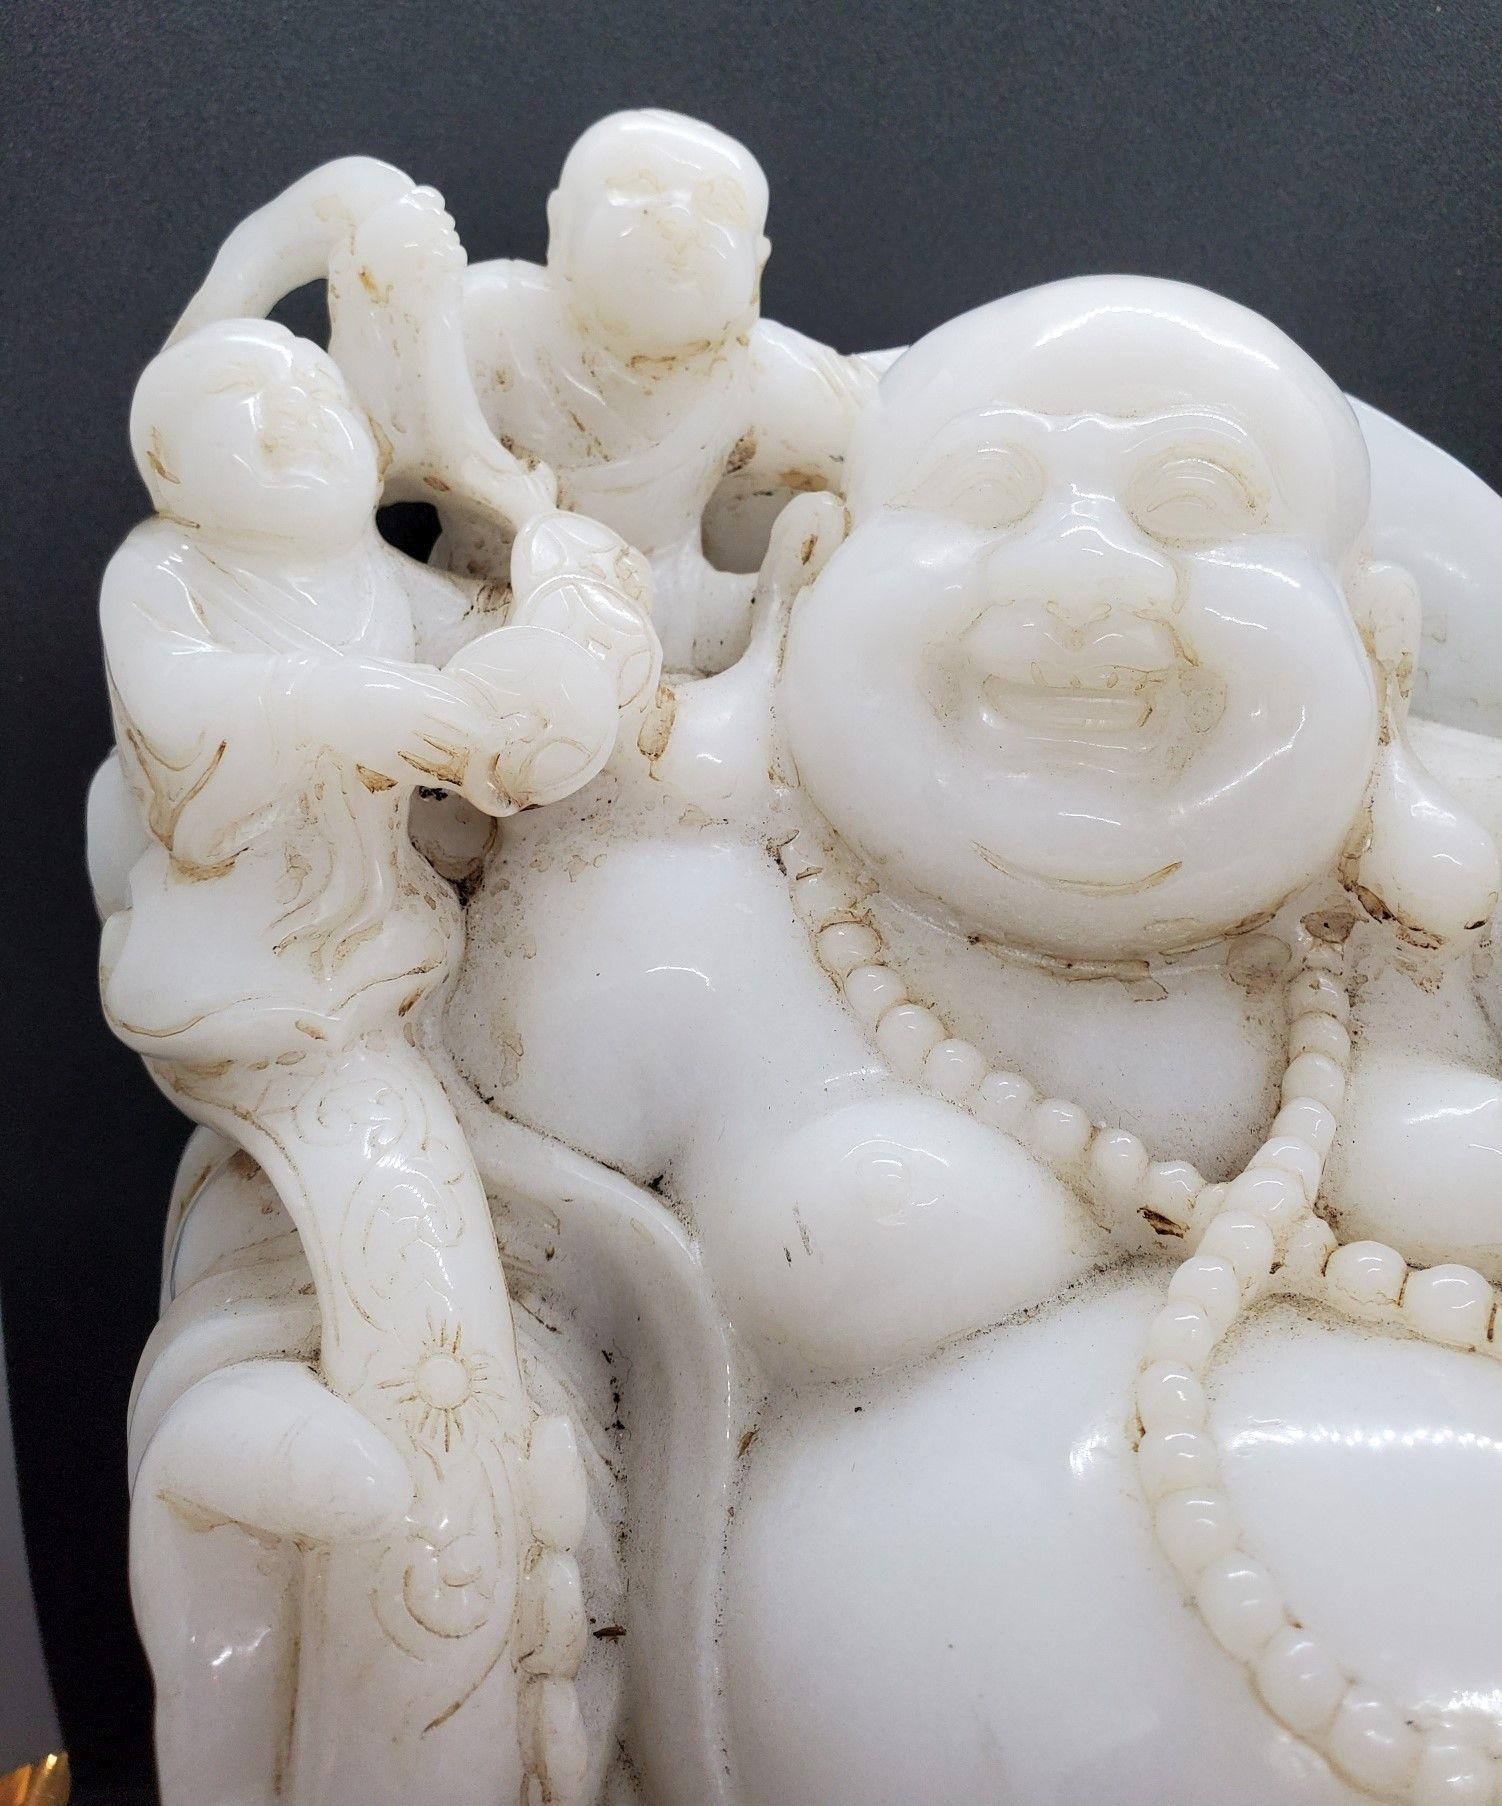 Large early 20th century Chinese marble/stone laughing buddha with children. Good weight.
Dimensions
12